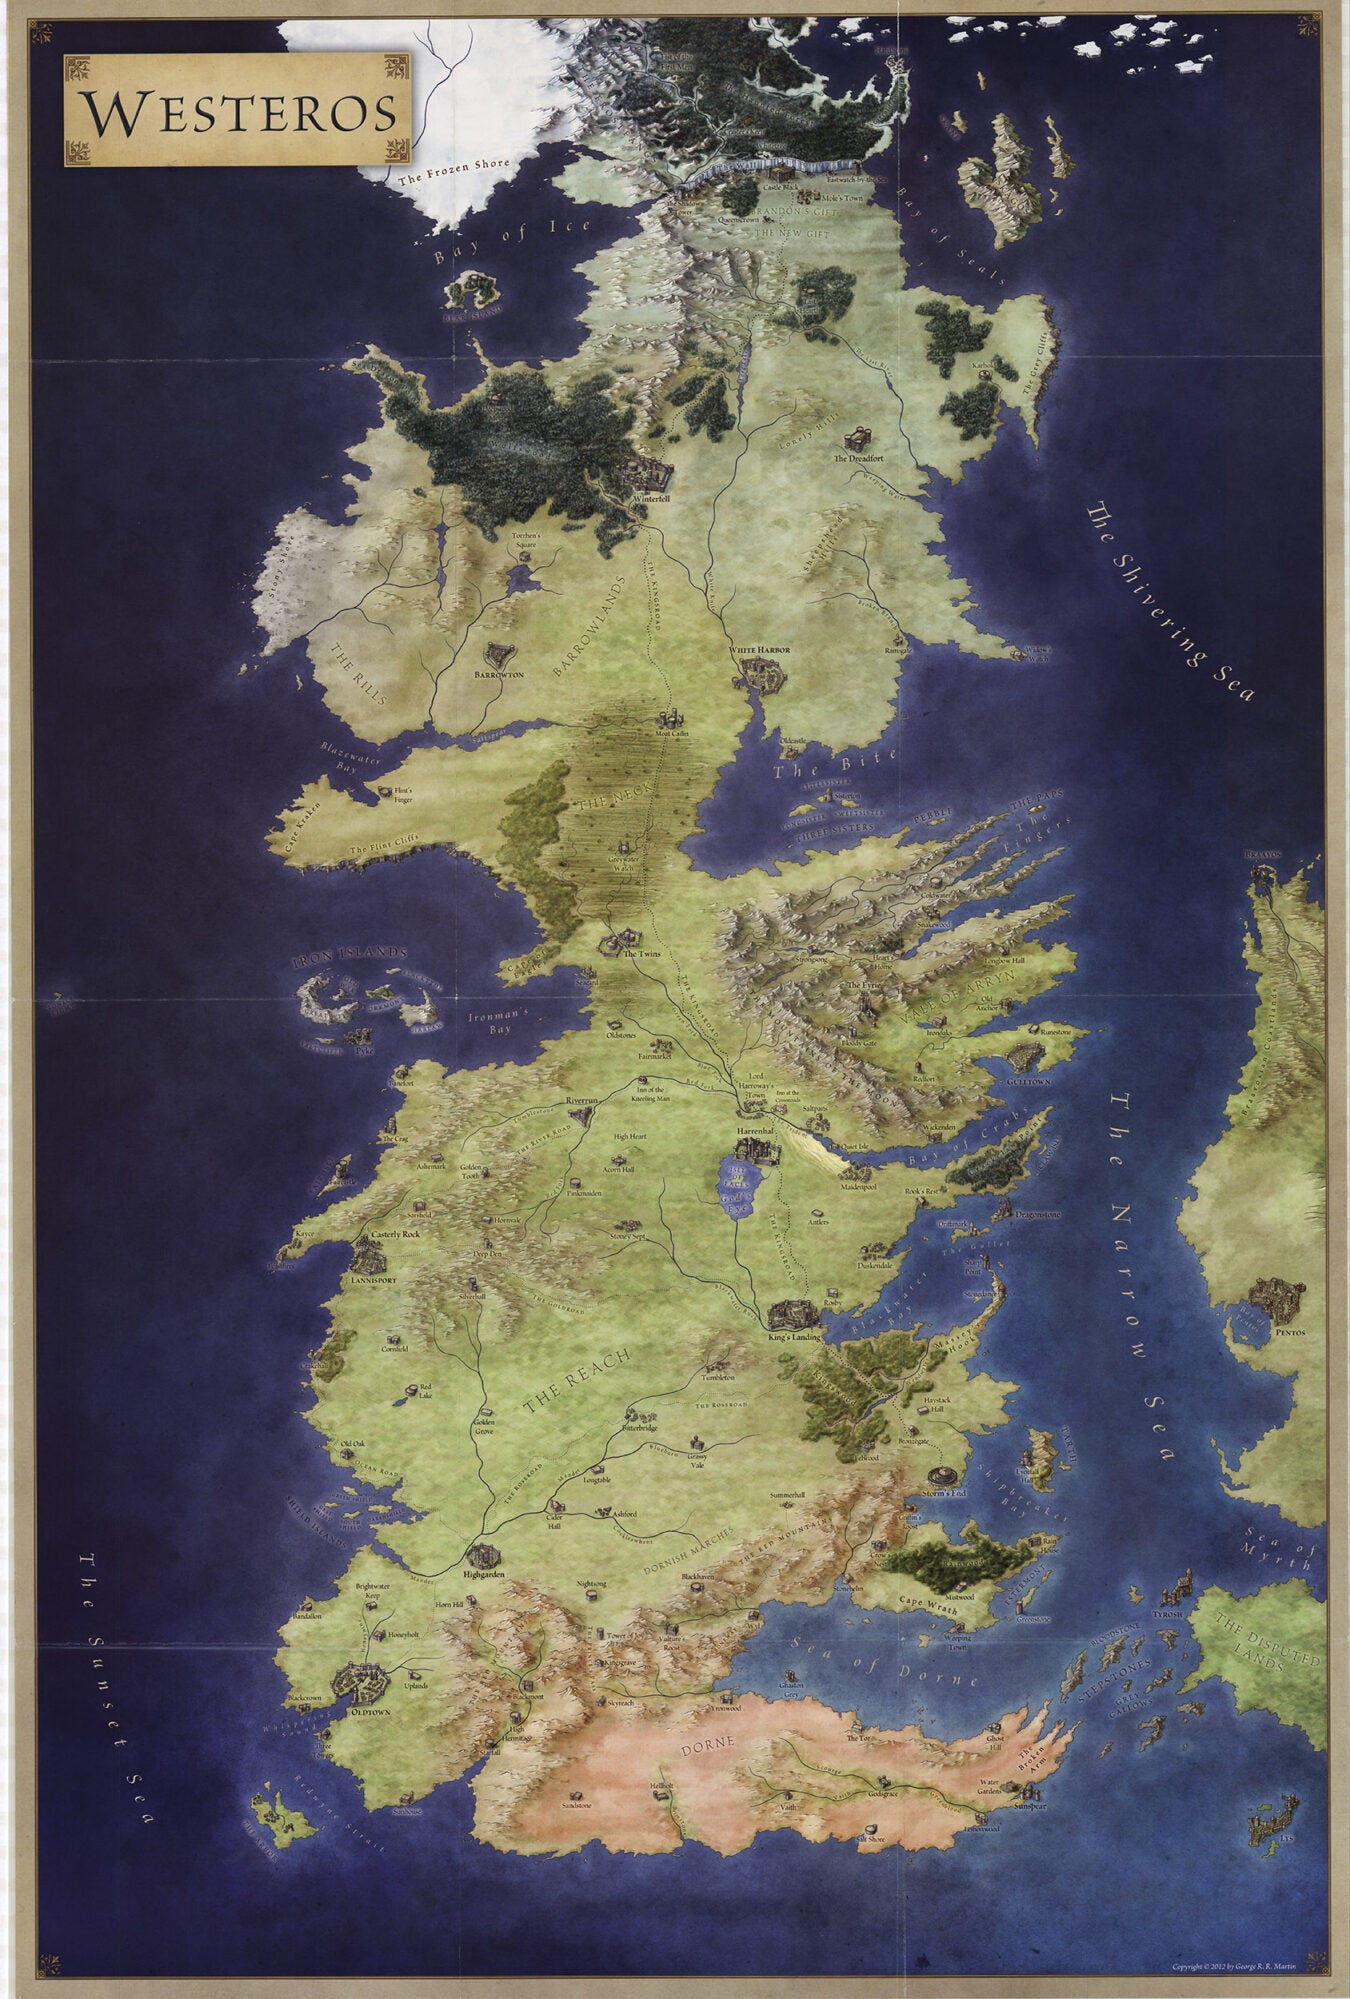 Map of Westeros developed to accompany Game of Thrones series.